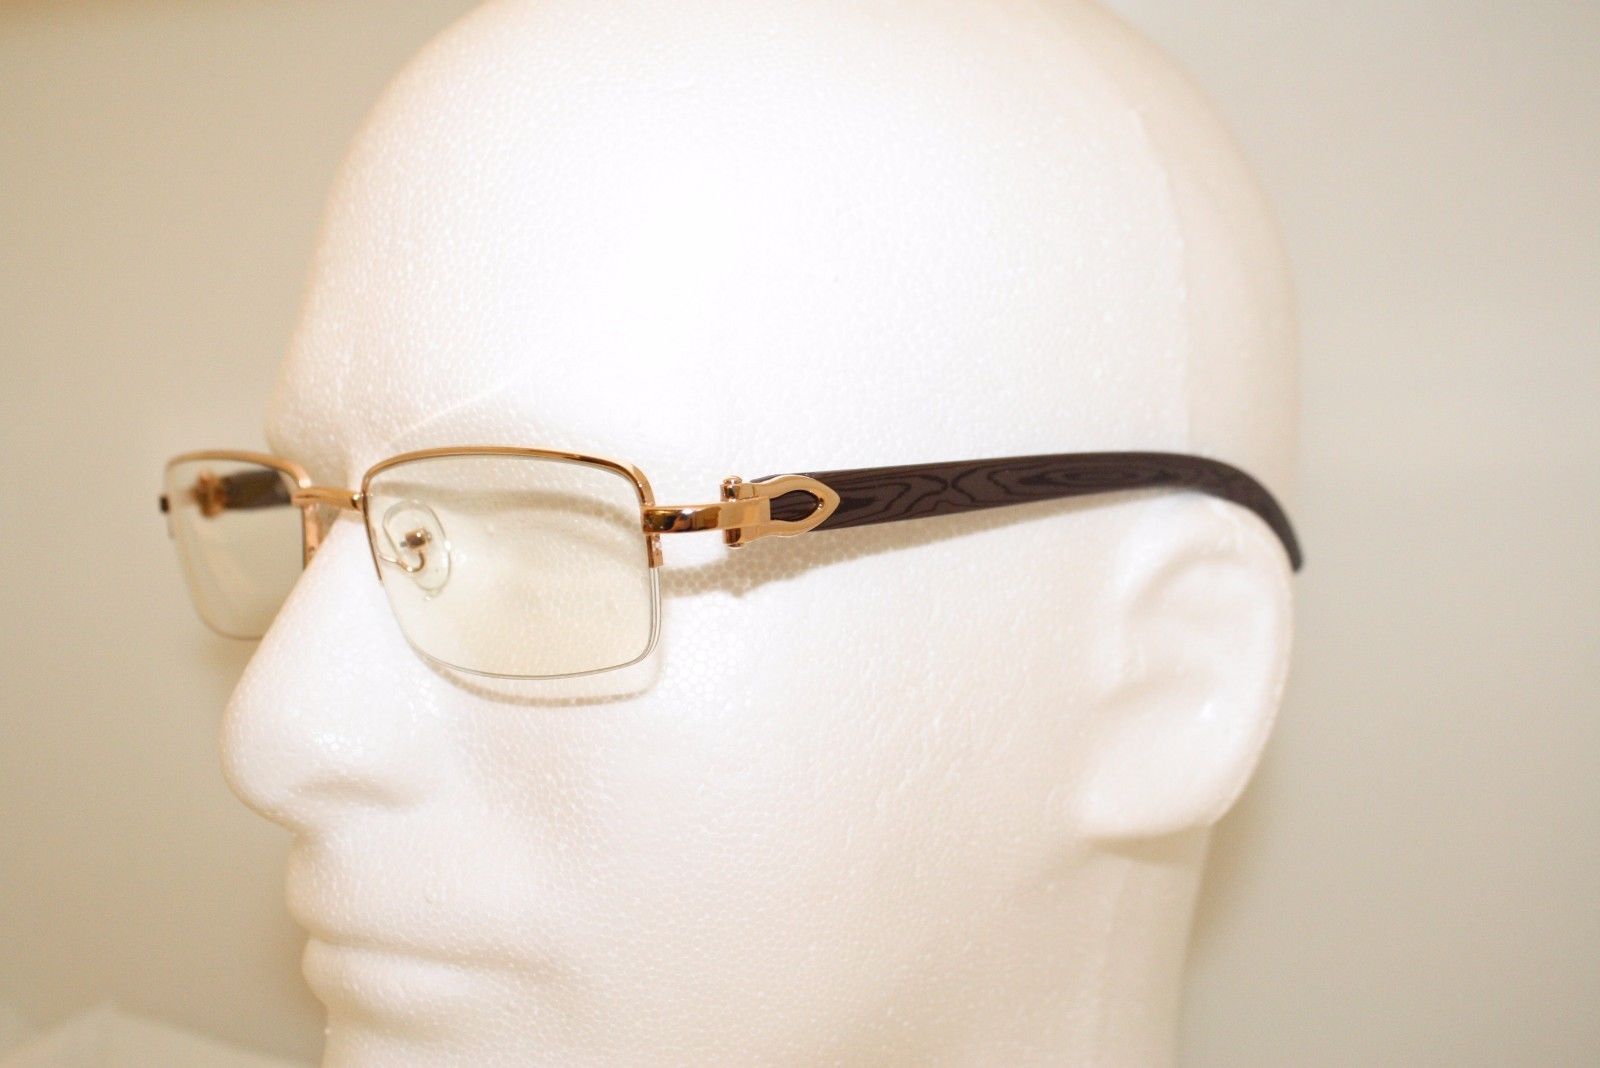 Cartier Style Wood Buffs Glasses Sunglasses Rose Gold Frames With Wood Look New Mens Accessories 